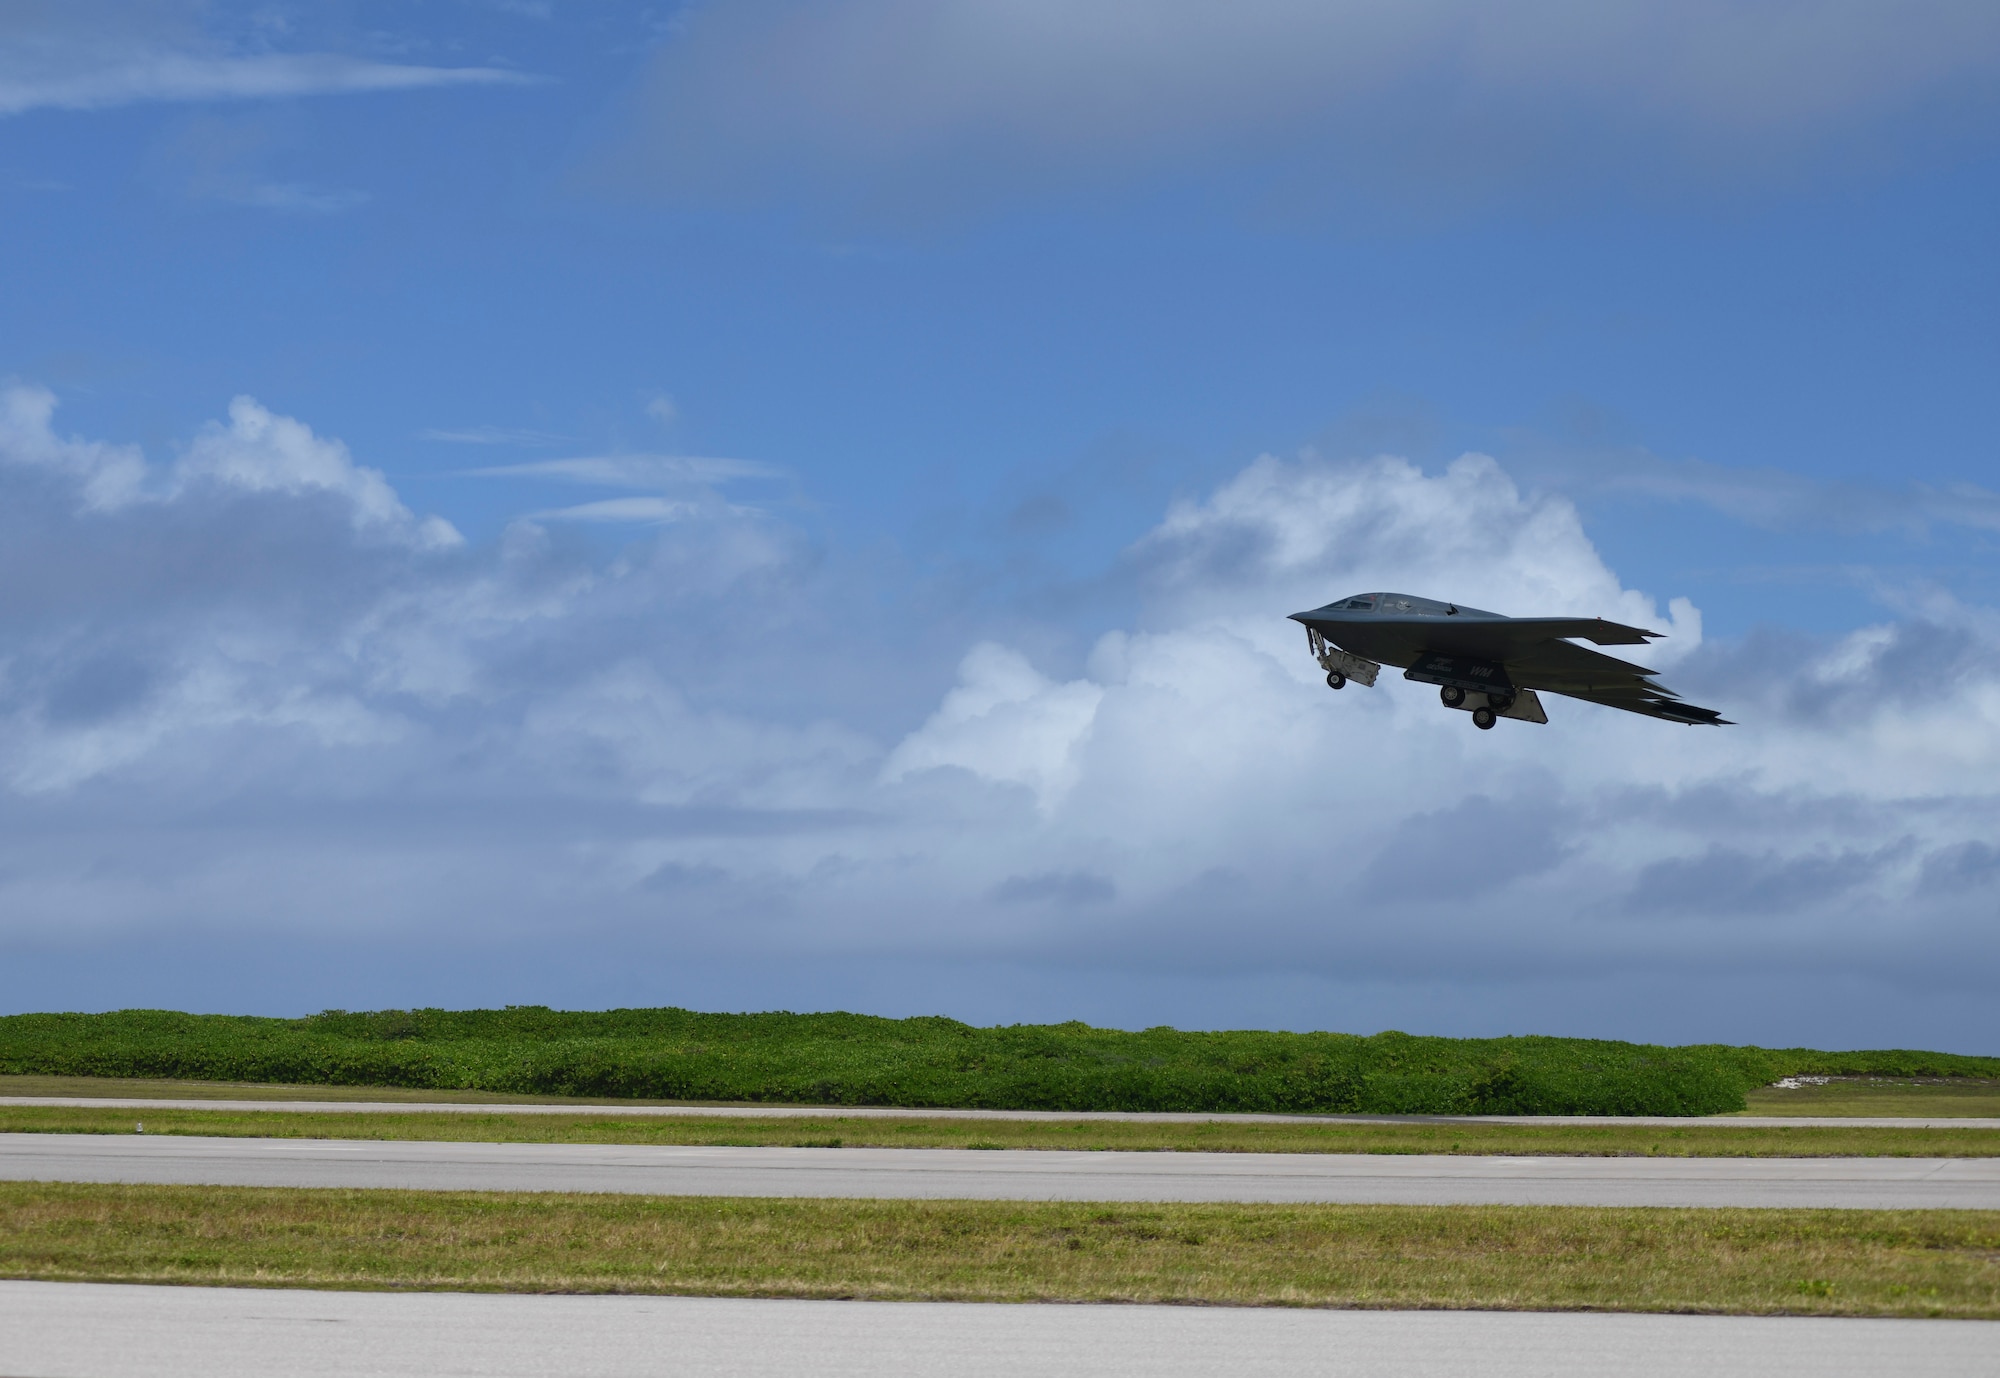 A B-2 Spirit Stealth Bomber, deployed from Whiteman Air Force Base, Missouri, takes-off from Naval Support Facility Diego Garcia, to support a Bomber Task Force mission,  Aug. 17, 2020. Bomber Task Force missions allow U.S. Strategic Command to provide persistent, long-term bomber presence to aid in U.S. Indo-Pacific Command’s commitment to a free and open Indo-Pacific. Over the course of 24 hours, four B-1B Lancers, two B-2 Spirit Stealth Bombers, and four F-15C Eagles conducted Bomber Task Force missions simultaneously within the Indo-Pacific region. Pacific Air Forces routinely conducts BTF operations to show the United States’ commitment to allies and partners in the Indo-Pacific area of responsibility. (U.S. Air Force photo by Tech. Sgt. Heather Salazar)